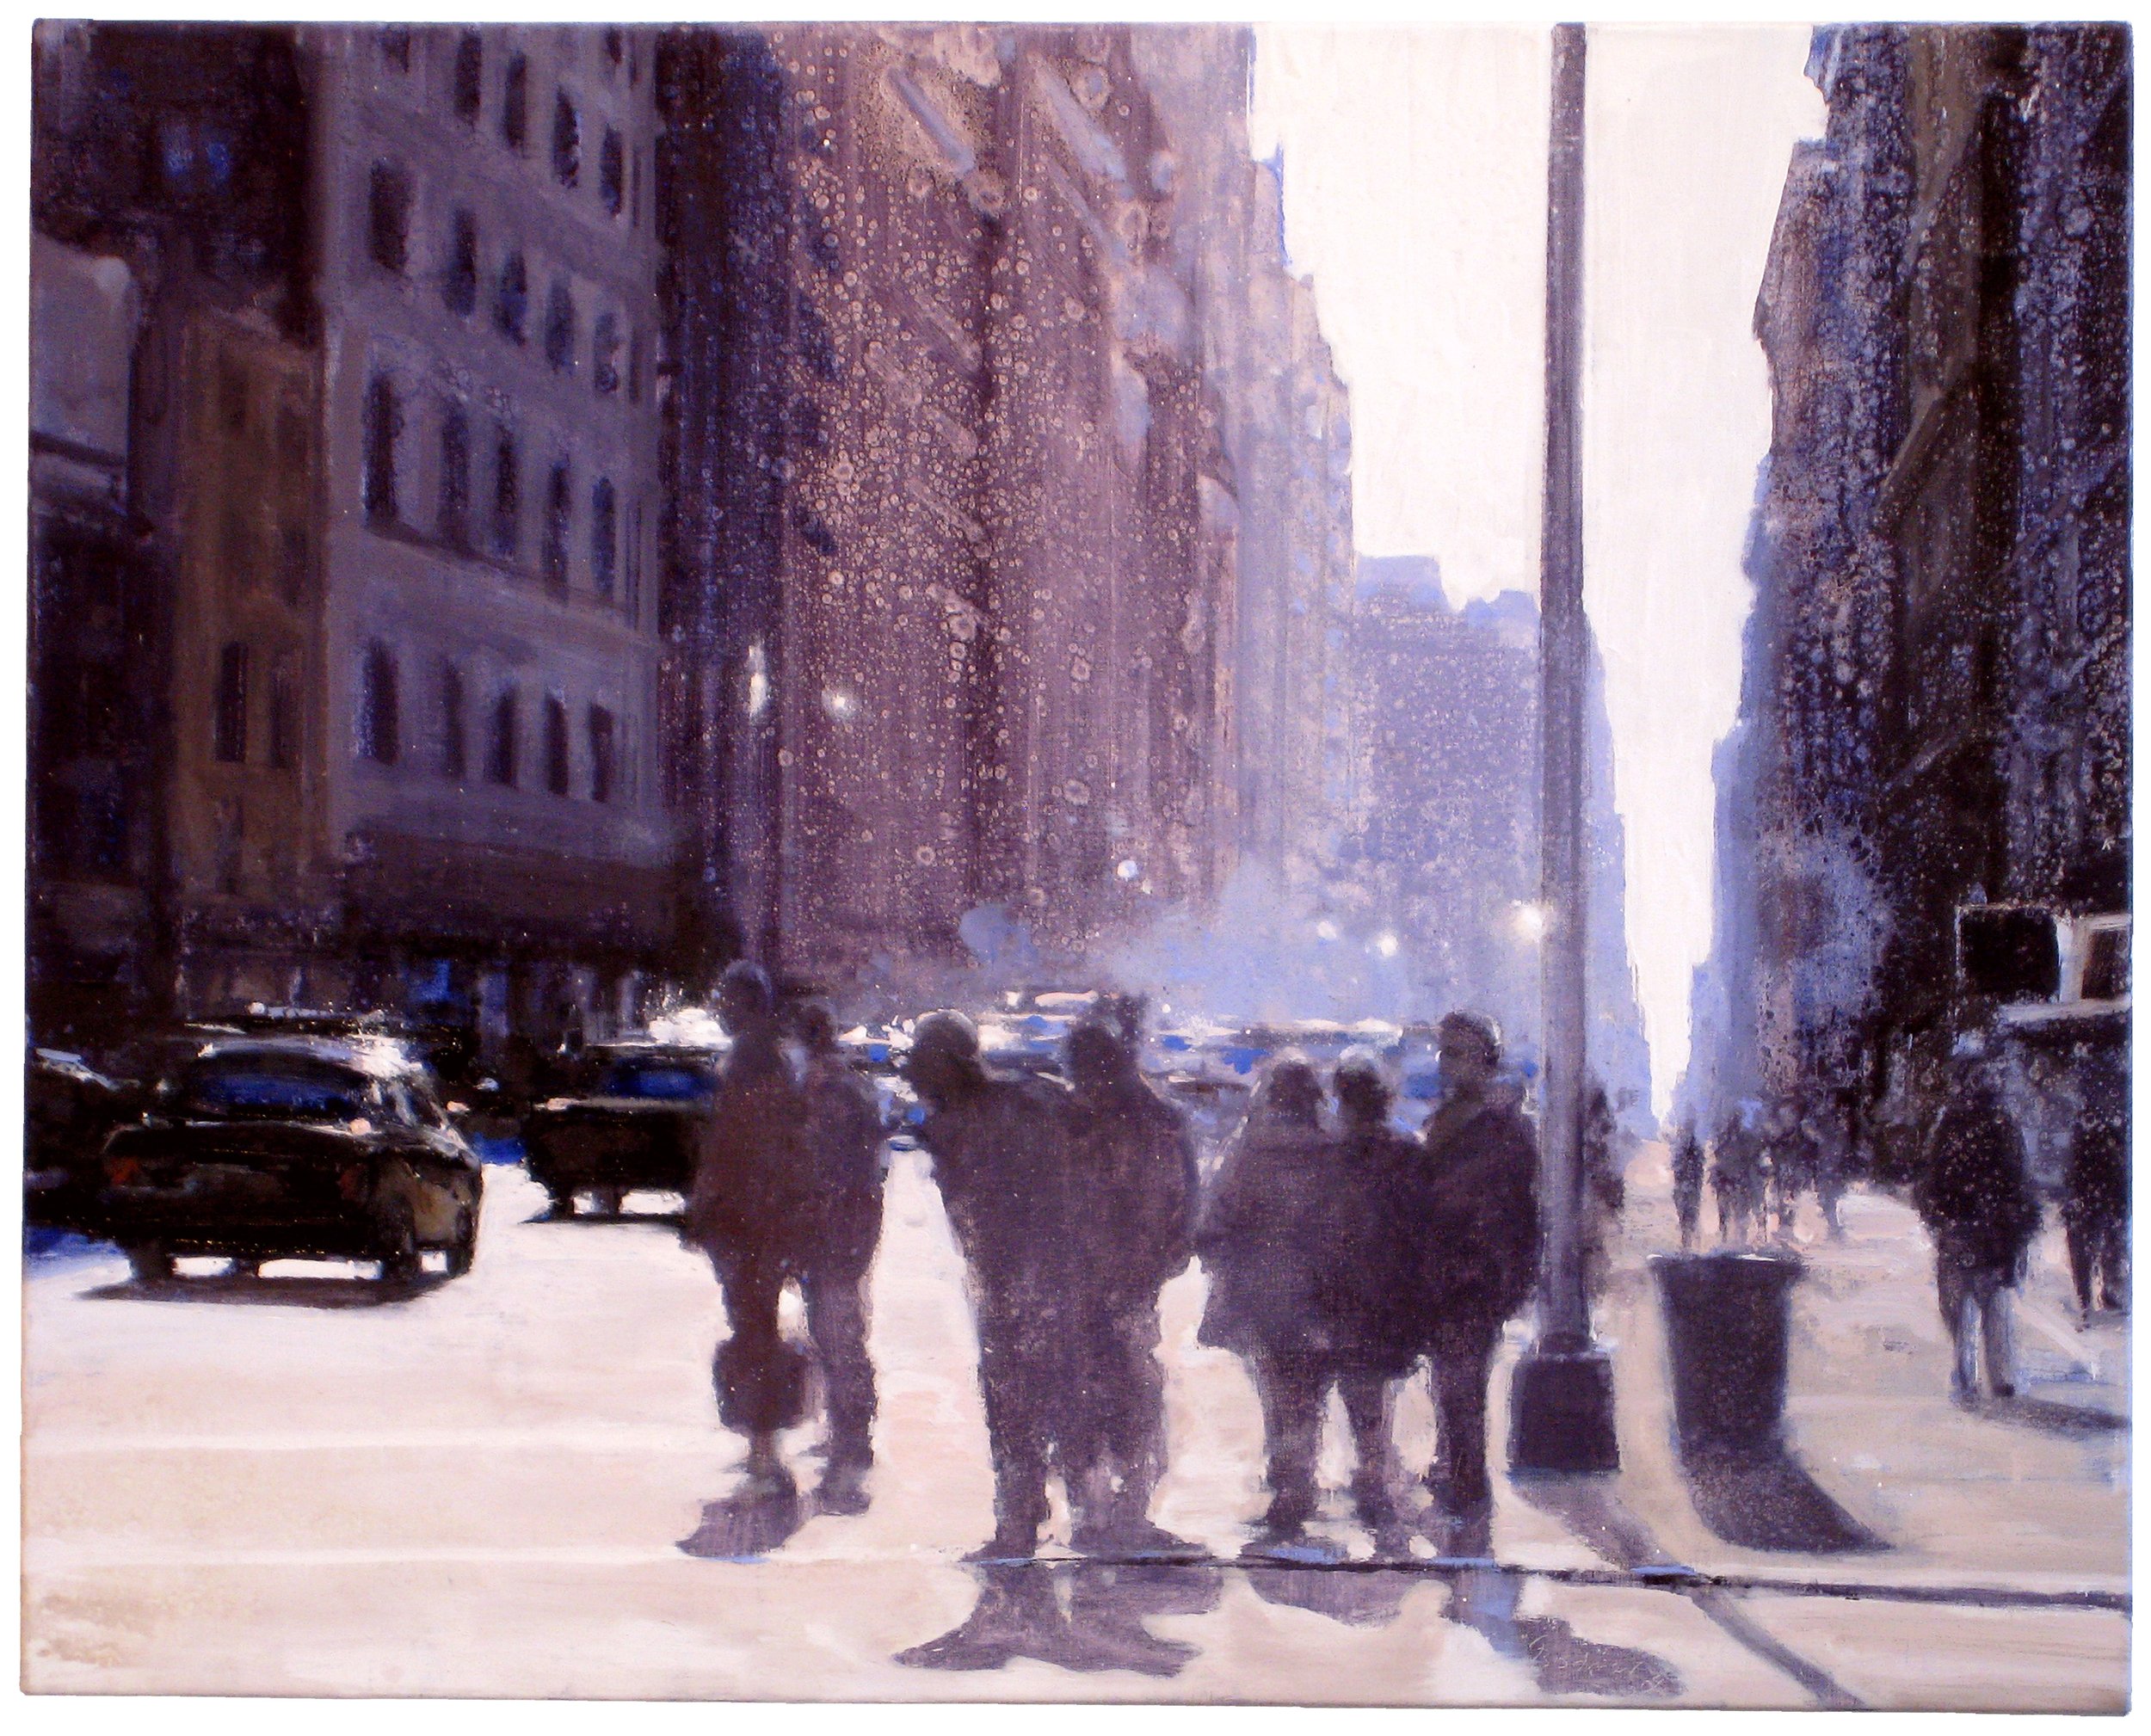  Crossing 5th Avenue 2 (study) 20x25 inches (51x63cm) Oil on linen 2008 